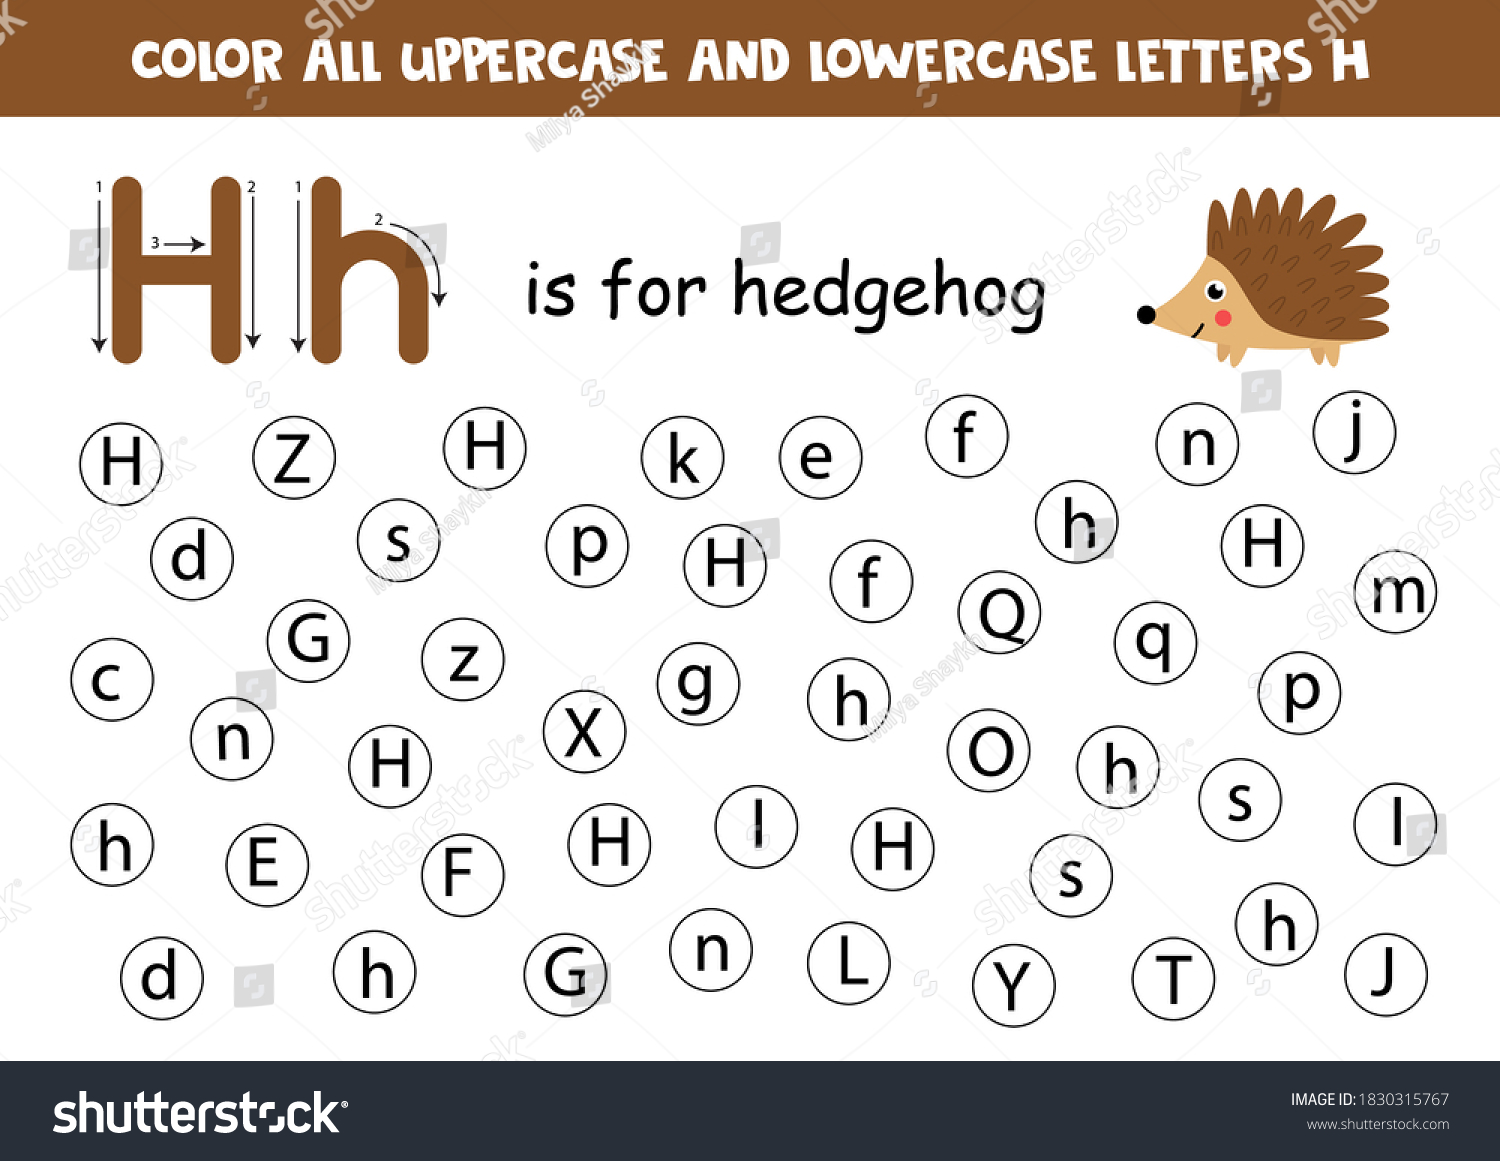 Letter h worksheets images stock photos d objects vectors